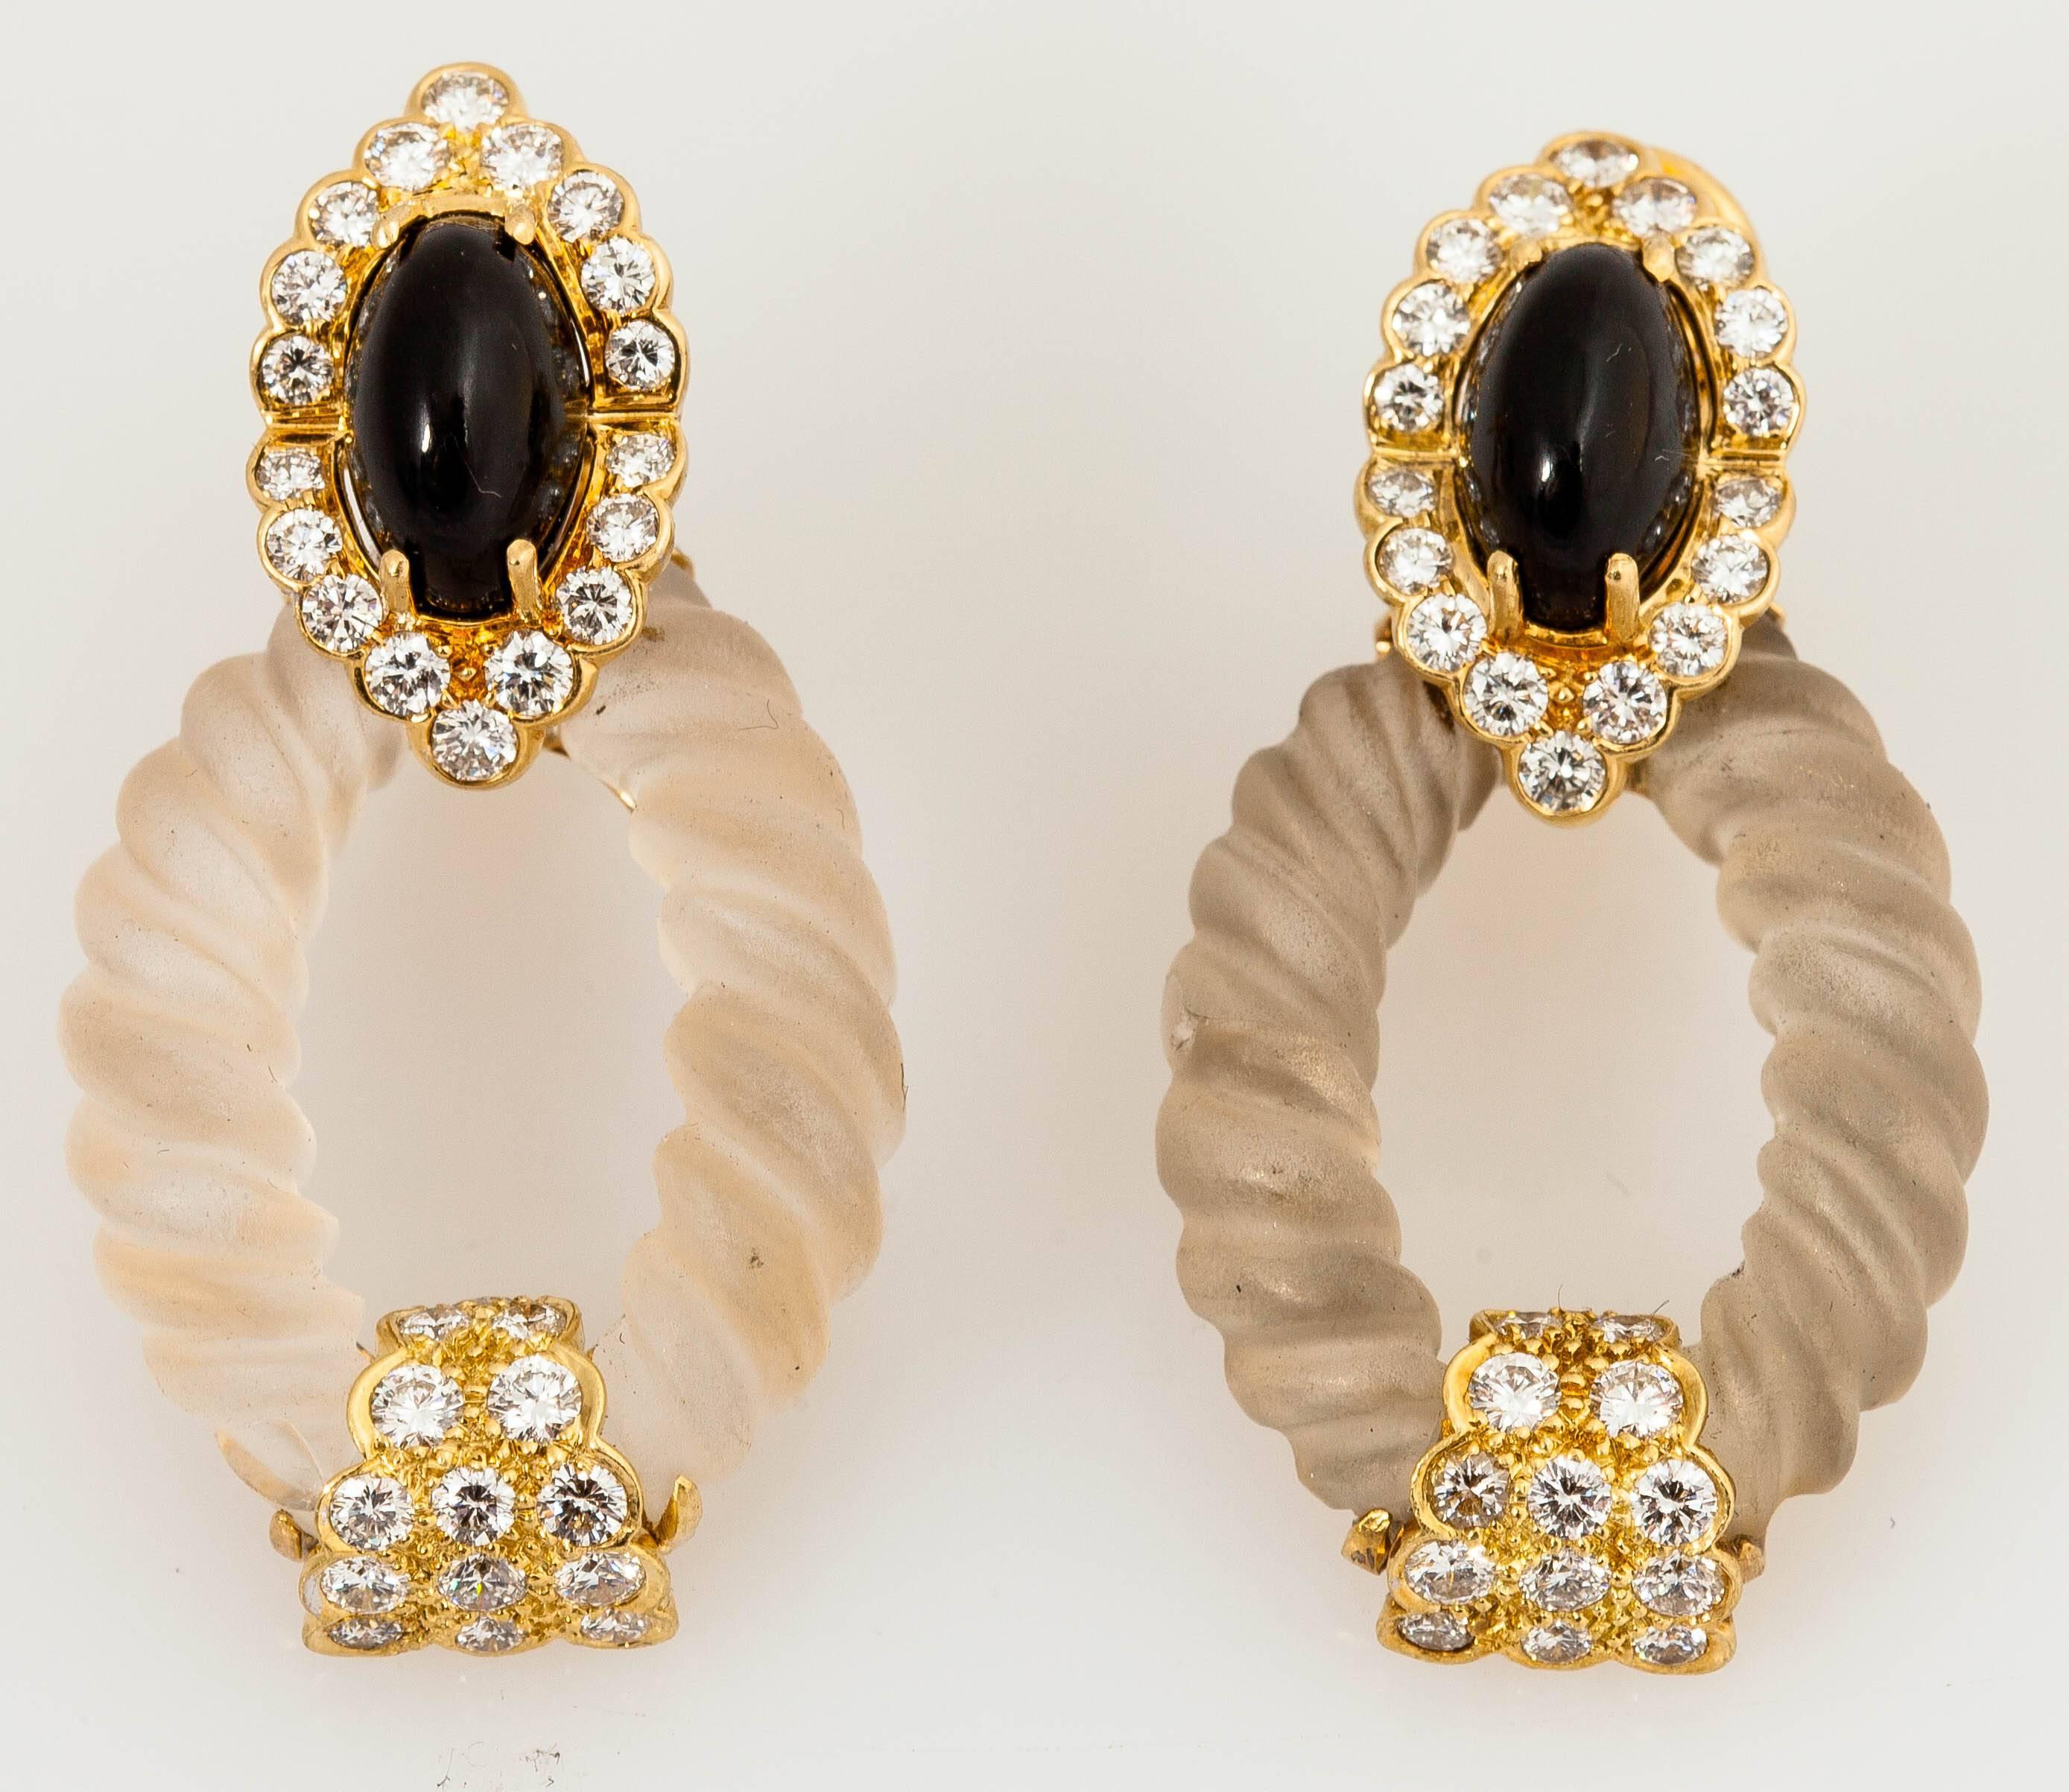 Hammerman Bros Elegant Onyx Crystal Gold Earrings and Necklace In New Condition For Sale In New York, NY